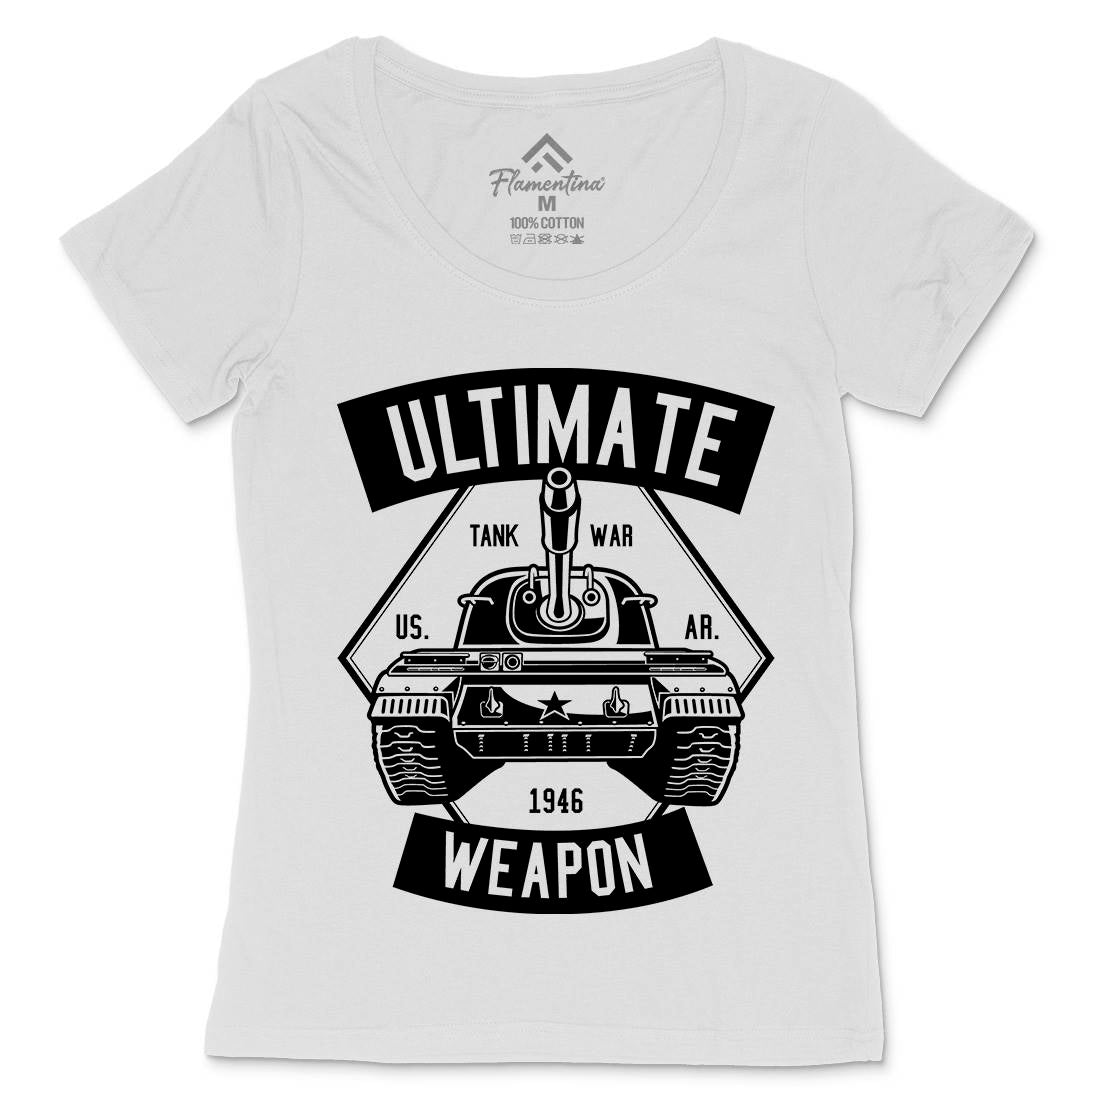 Tank War Ultimate Weapon Womens Scoop Neck T-Shirt Army B649